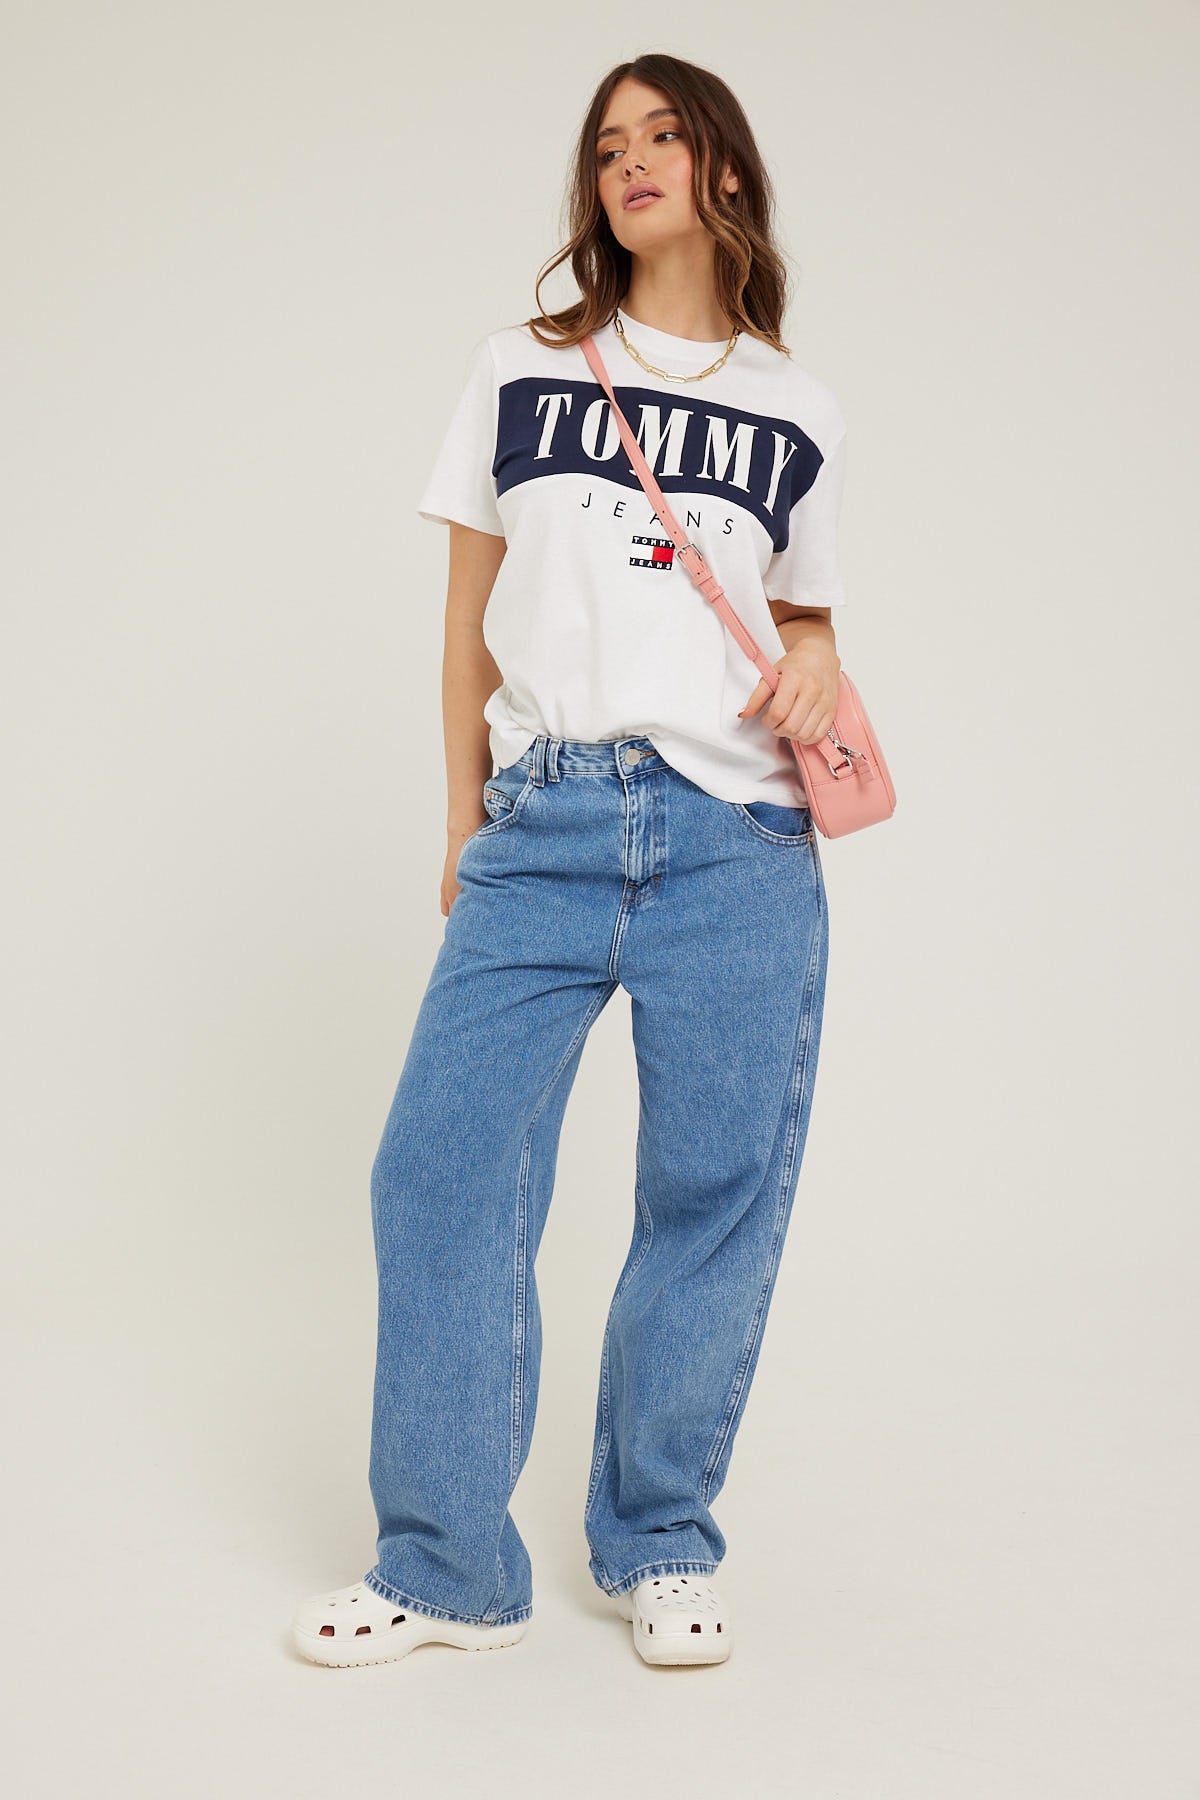 Tommy Jeans Relaxed Authentic Colourblock Tee White/Multi